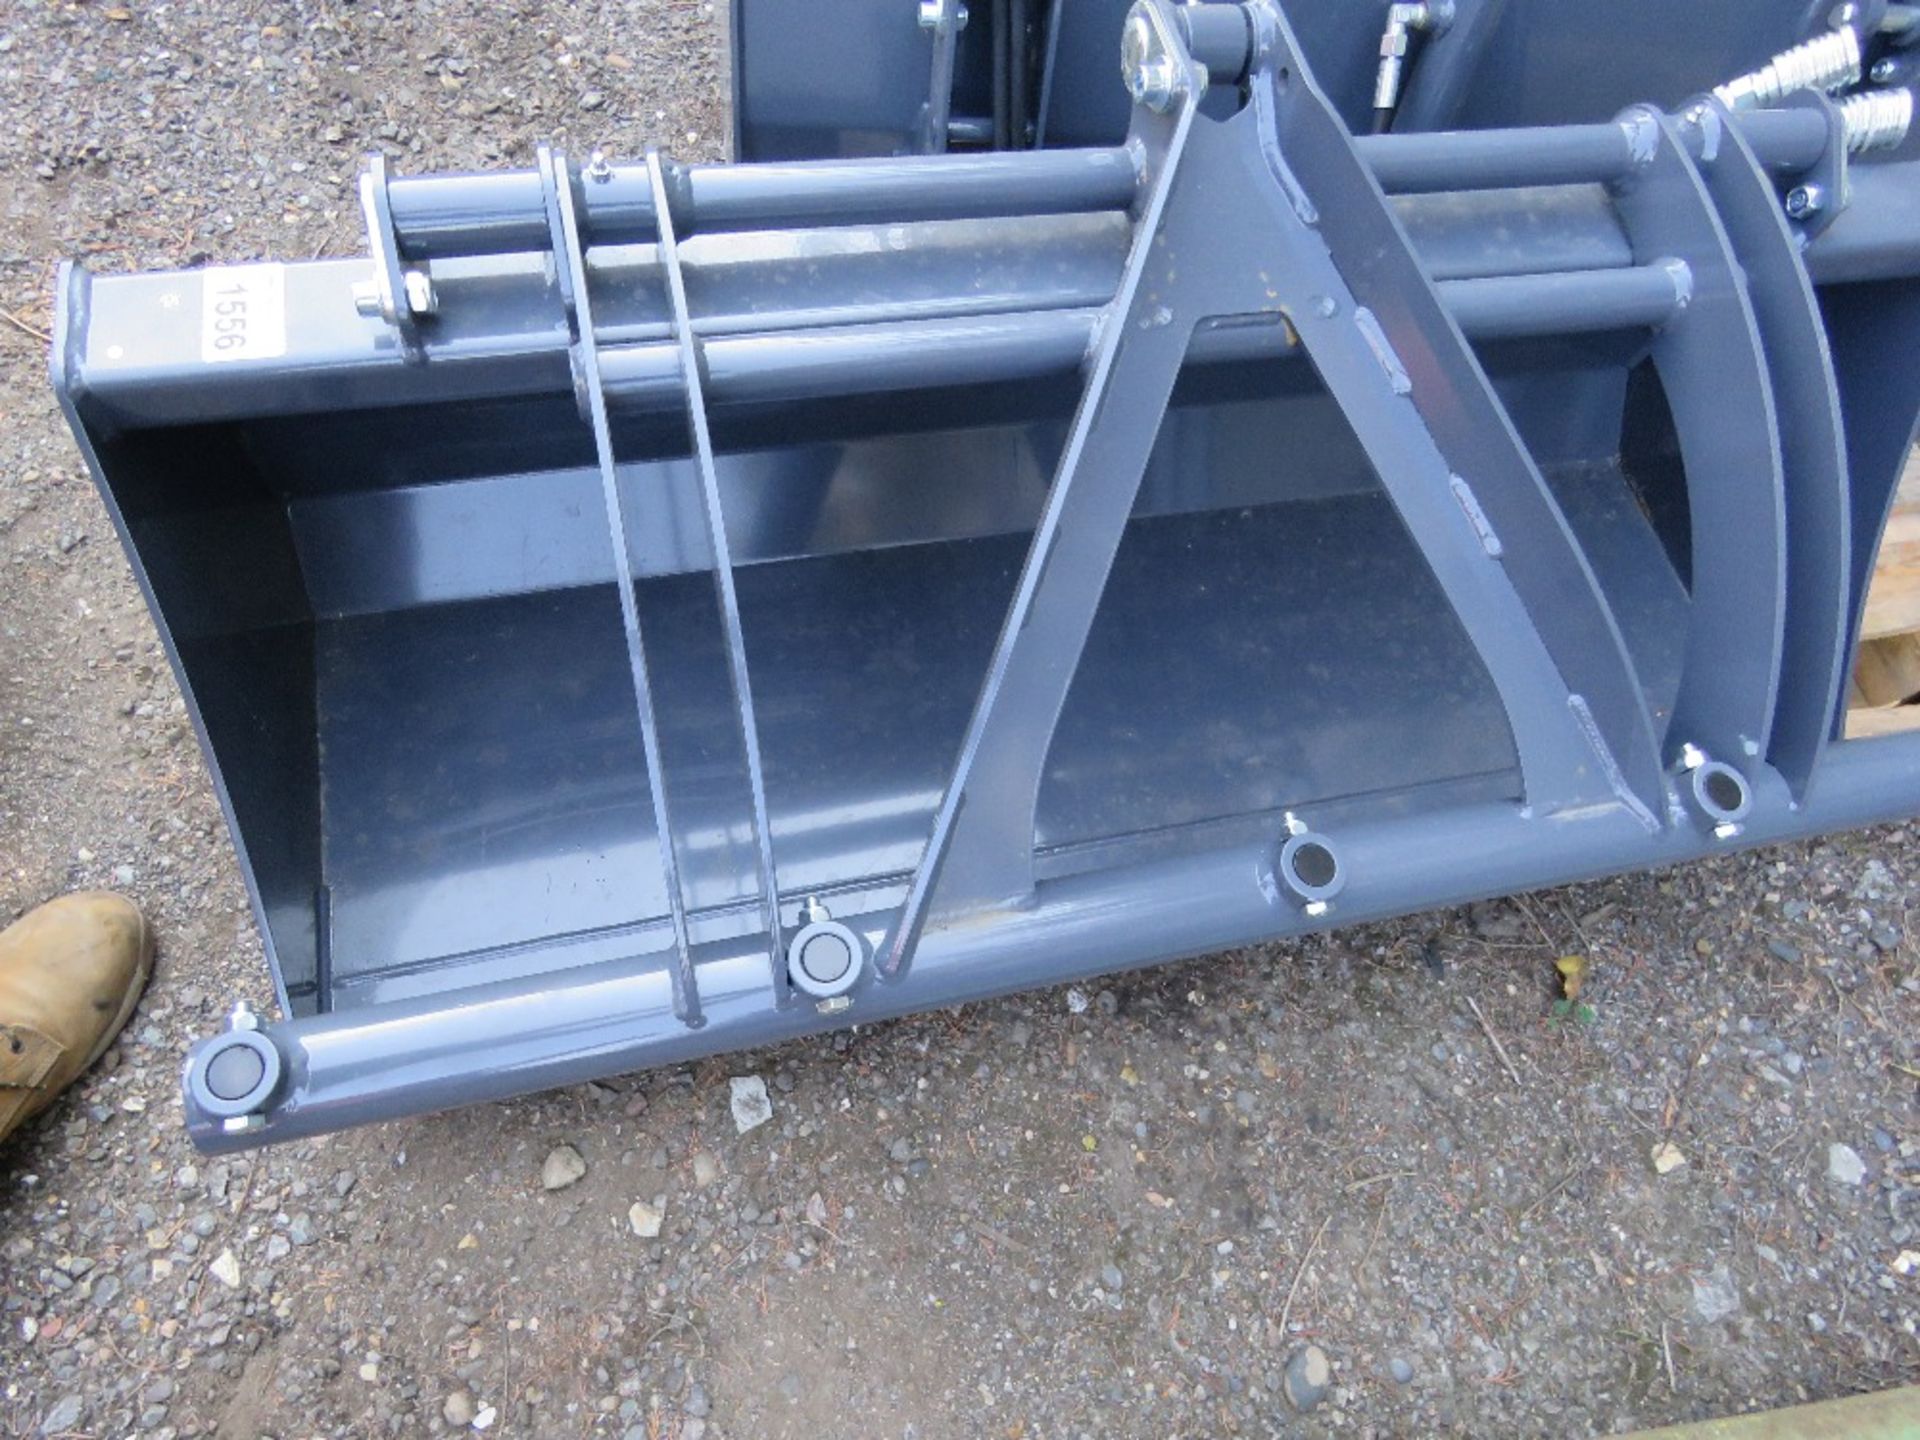 UNUSED MUCK GRAB LADER BUCKET TO SUIT COMPACT TRACTOR OR SKID STEER LOADER ETC. 4FT WIDTH APPROX. - Image 2 of 3